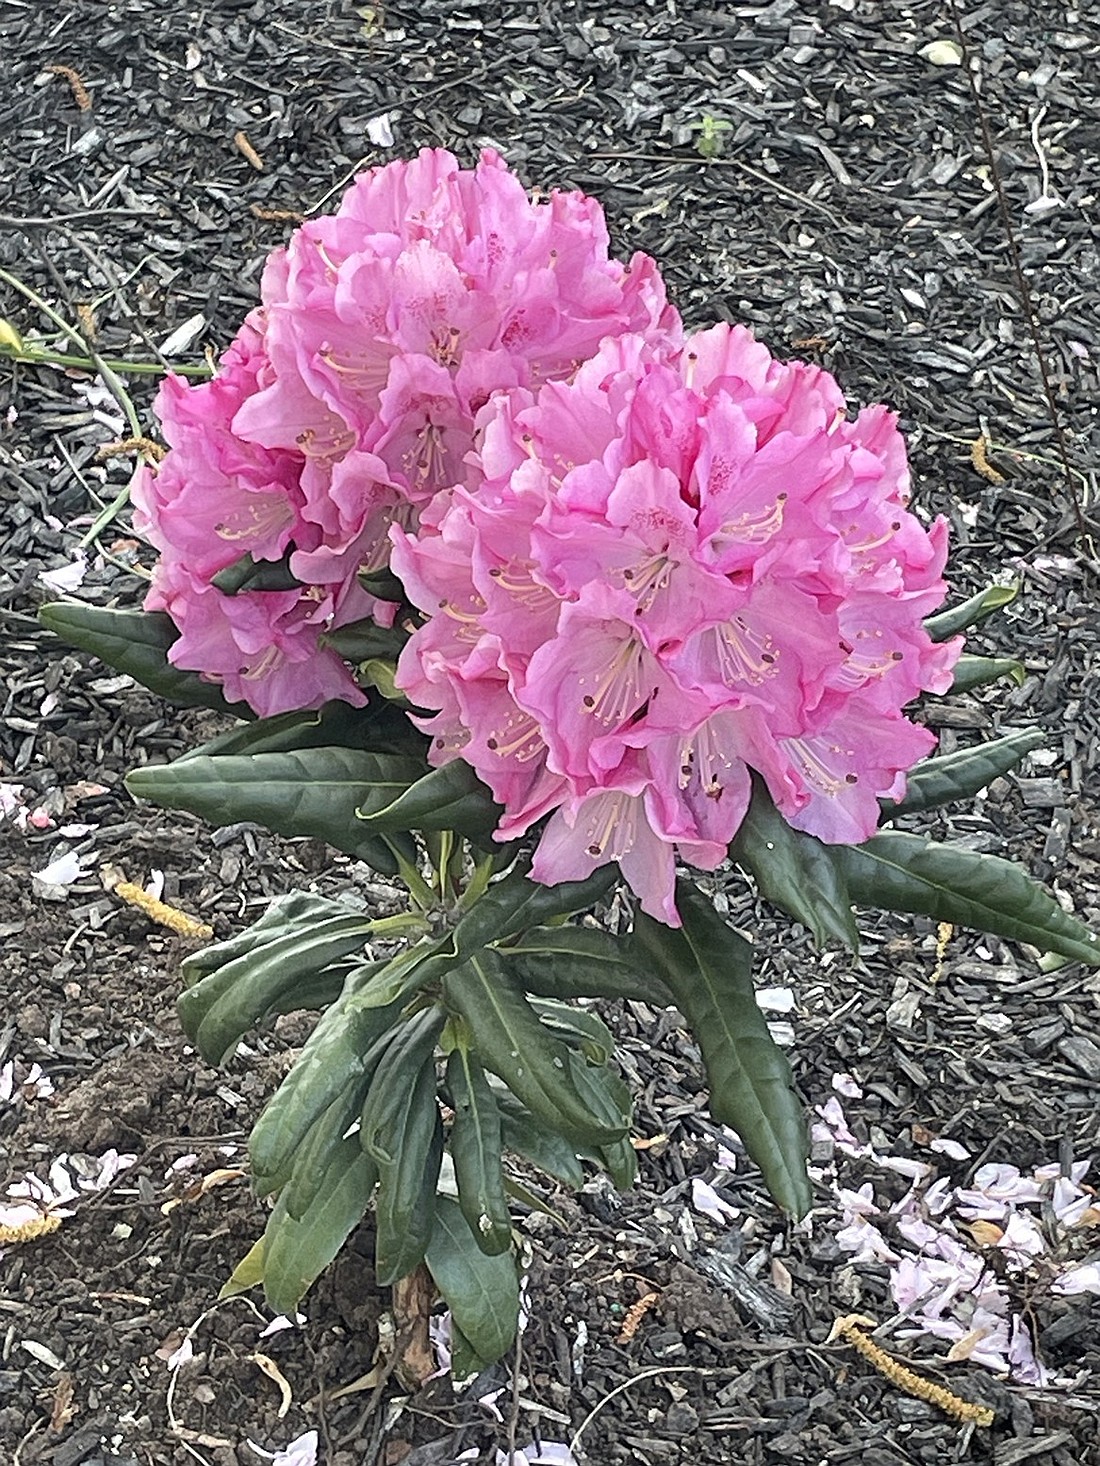 This random bright pink rhododendron pops in the beds surrounding Port Chester Village Hall at 222 Grace Church St., nicely landscaped with daffodils in the early spring and annuals as the growing season progresses.